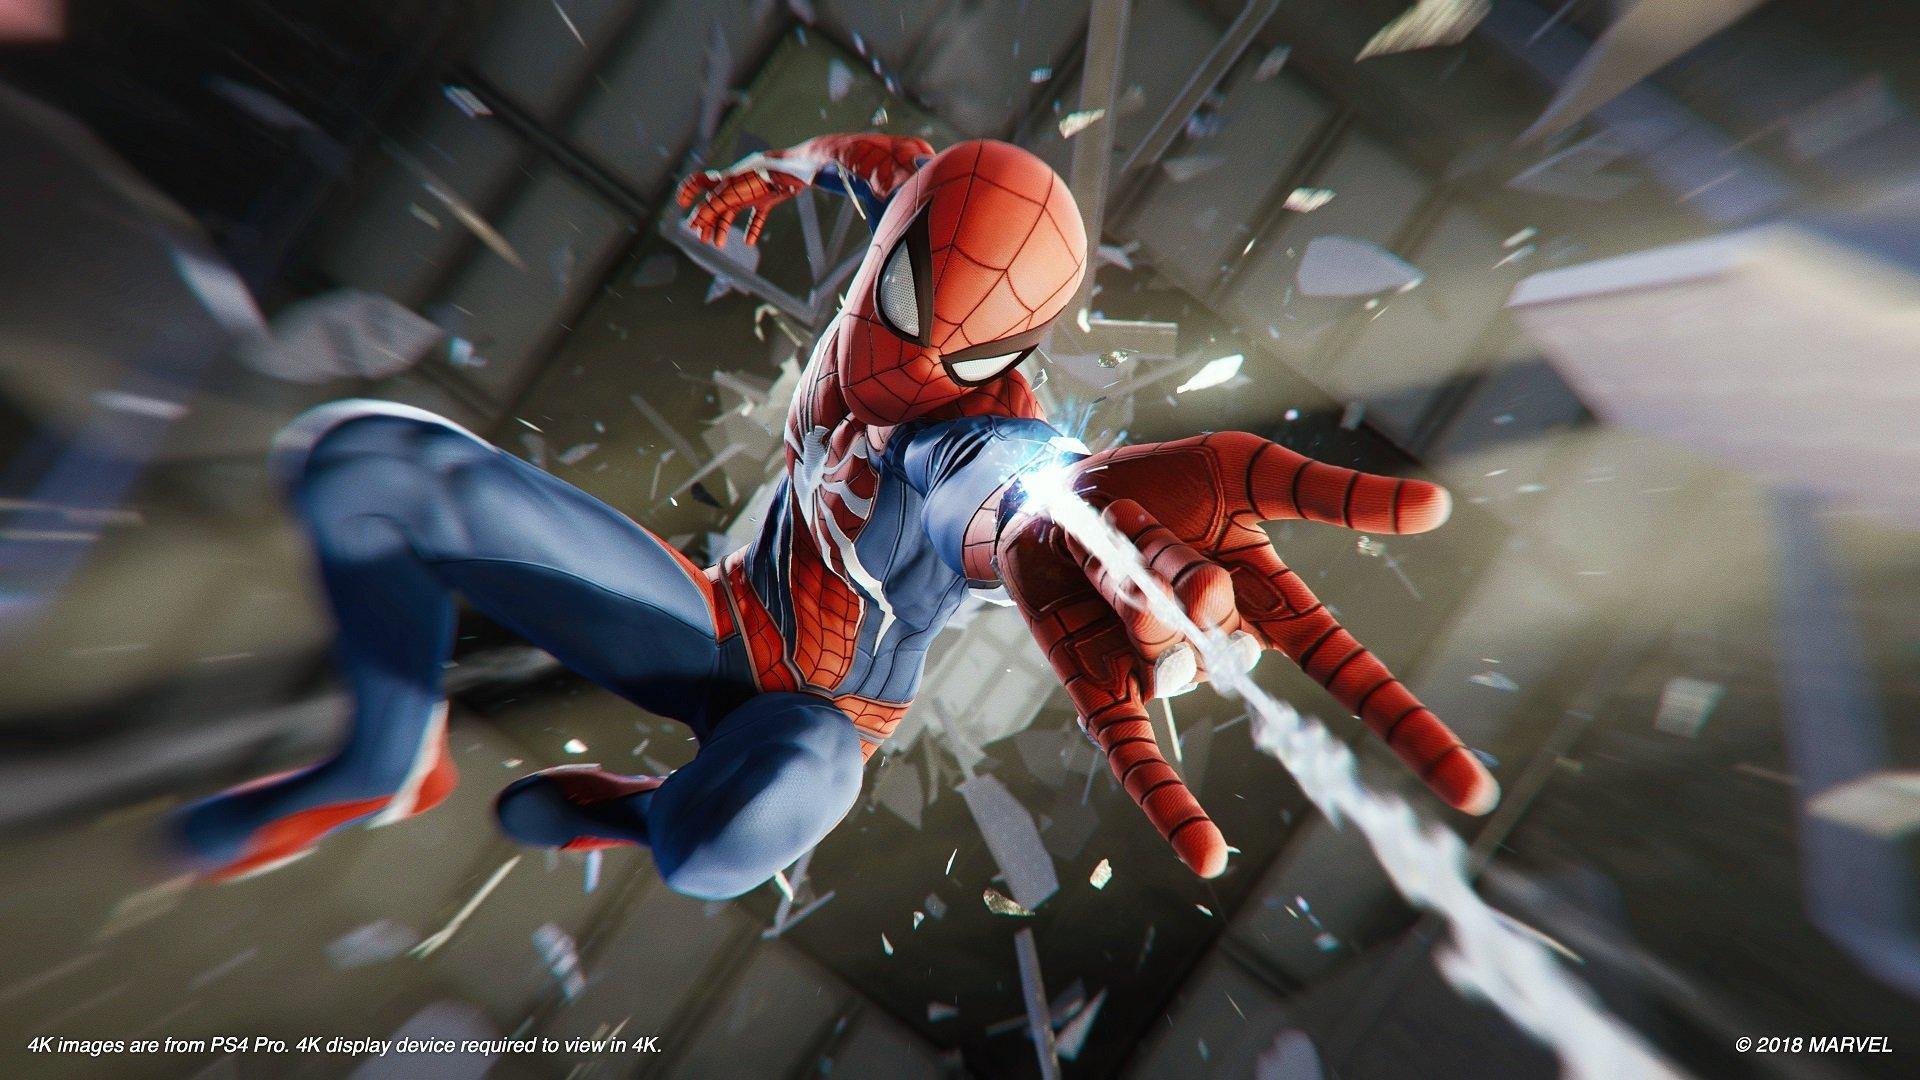 Spider Man PS4 Update 1.14 Adds Two Fantastic Four Suits For Free